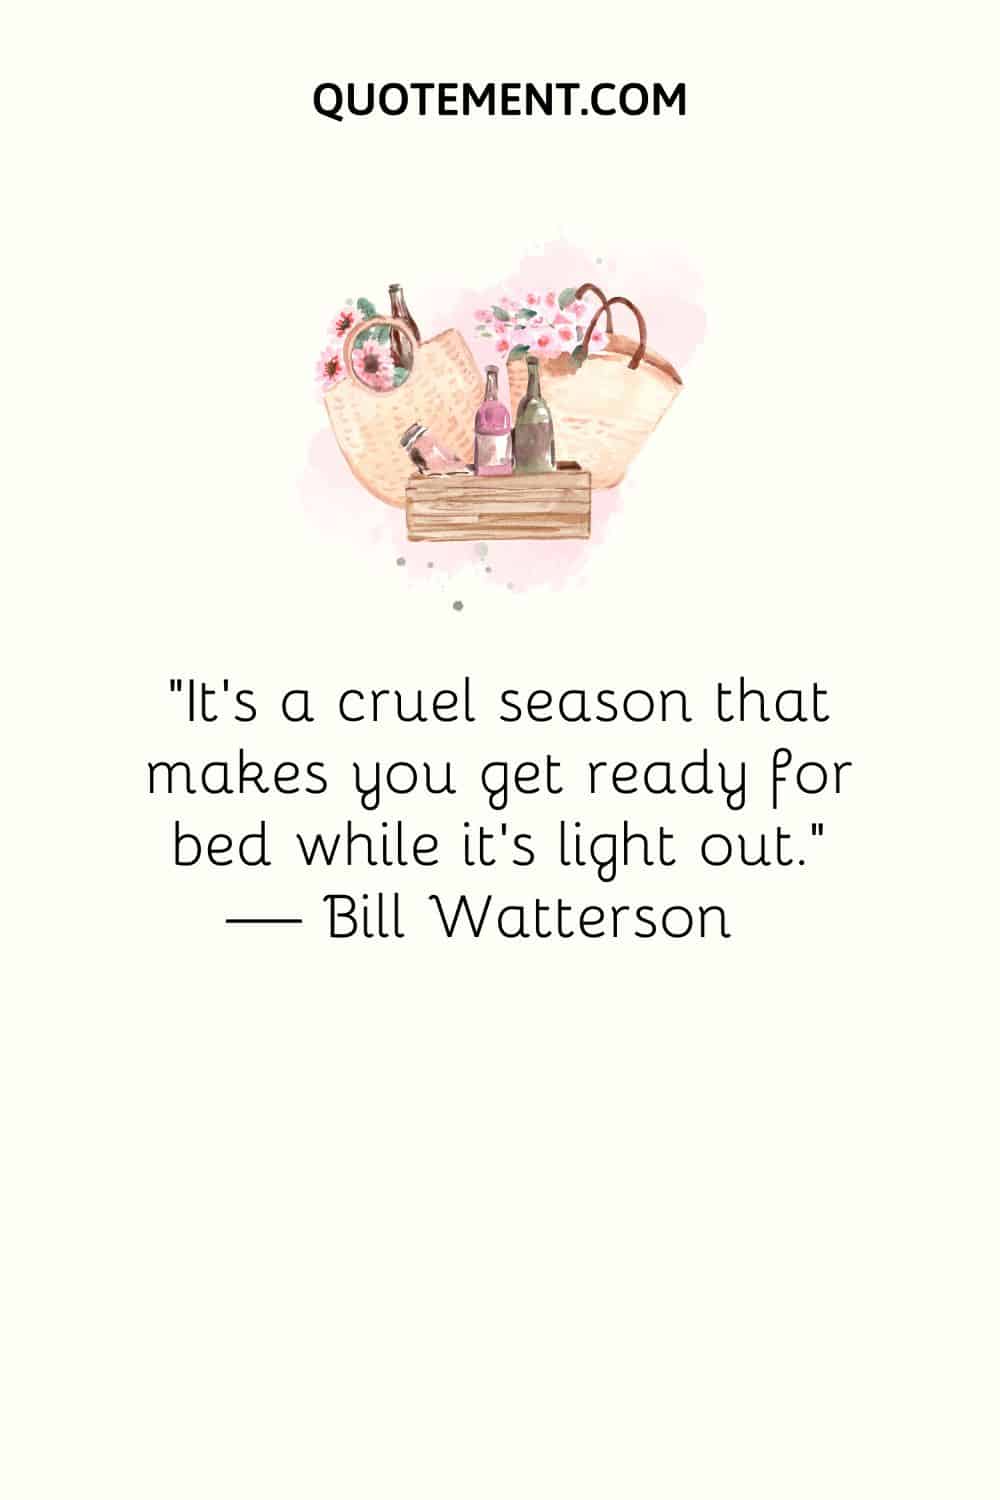 “It’s a cruel season that makes you get ready for bed while it’s light out.” — Bill Watterson